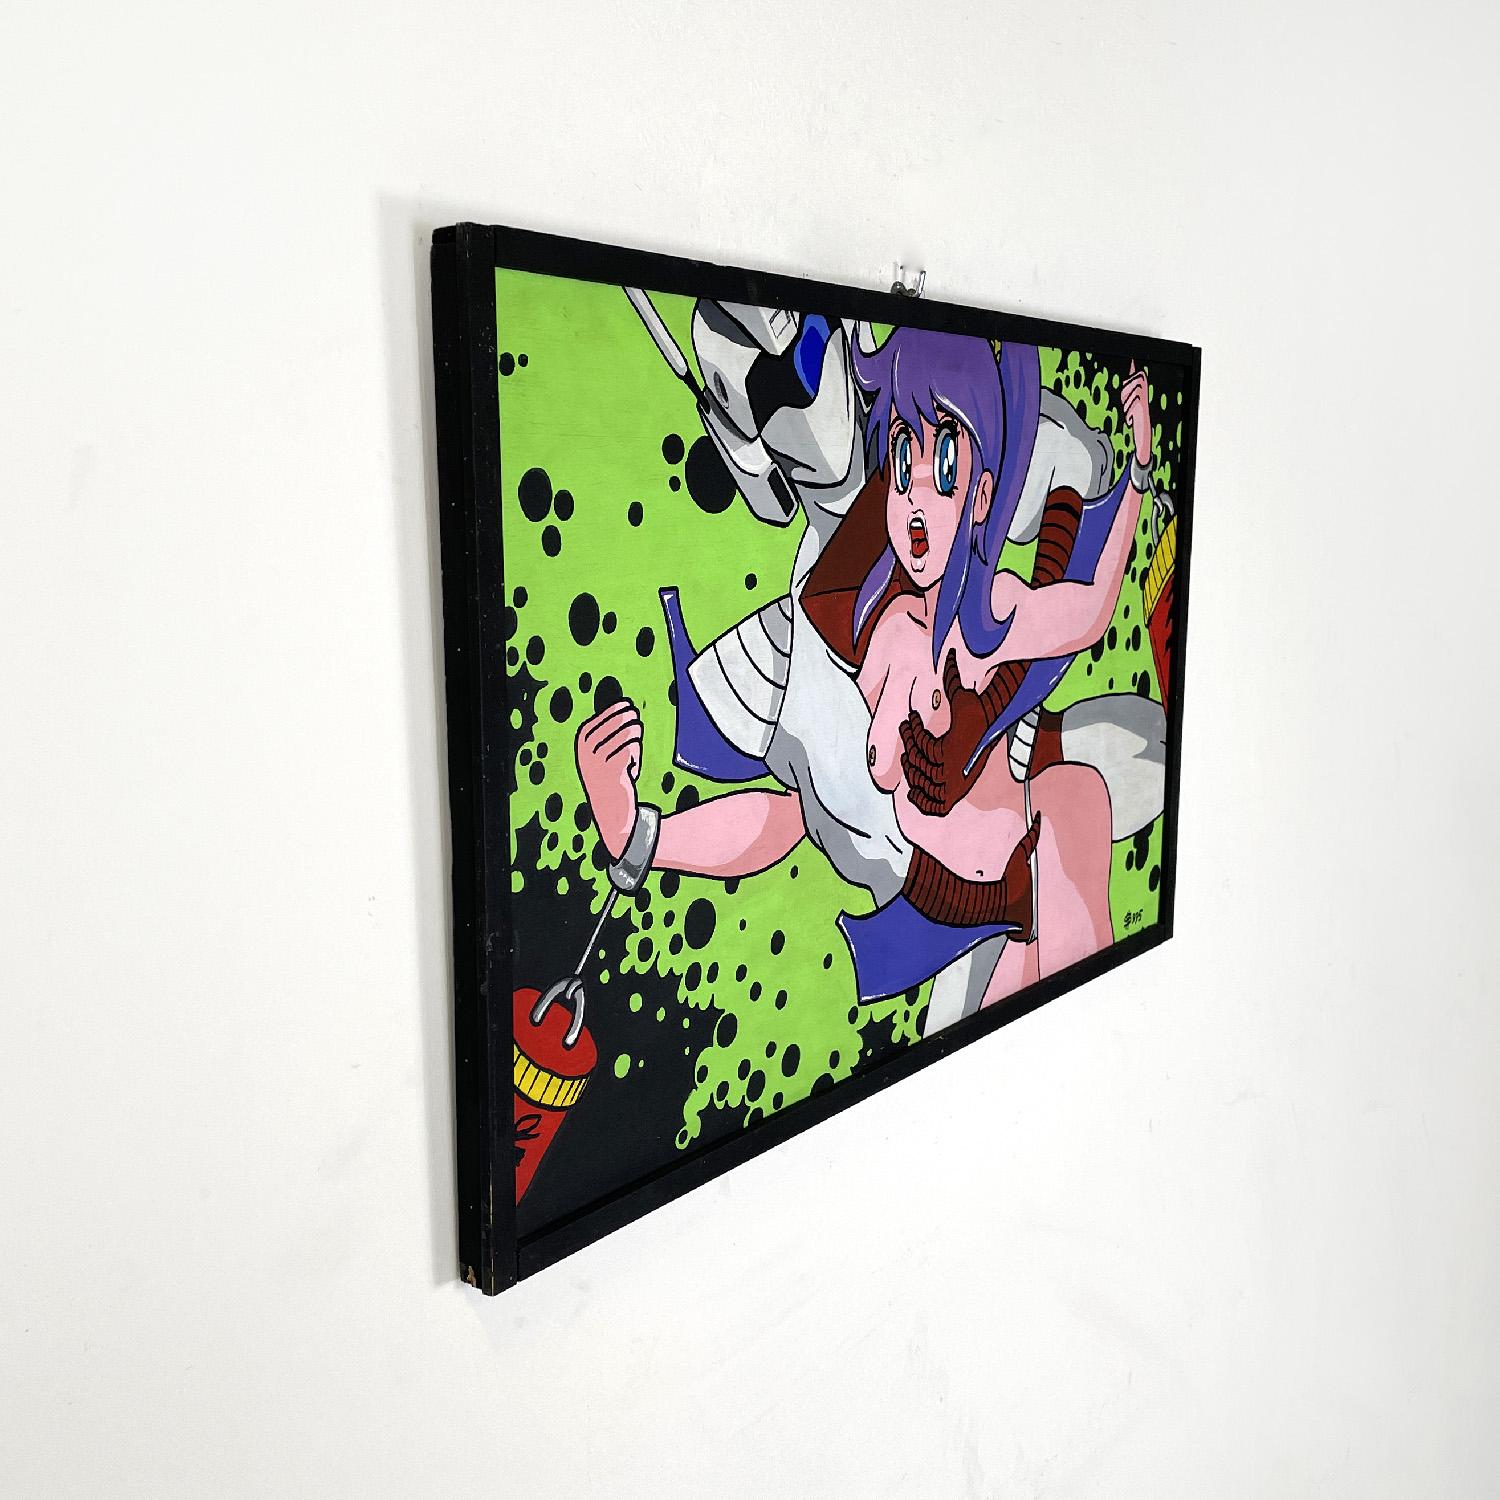 Italian modern erotic Japanese manga painting by Gianni S99, 1990s
Acrylic painting on board with an erotic theme, representing iconic characters from Japanese manga pop culture. The composition features bright and bright colors: red, blue, green,